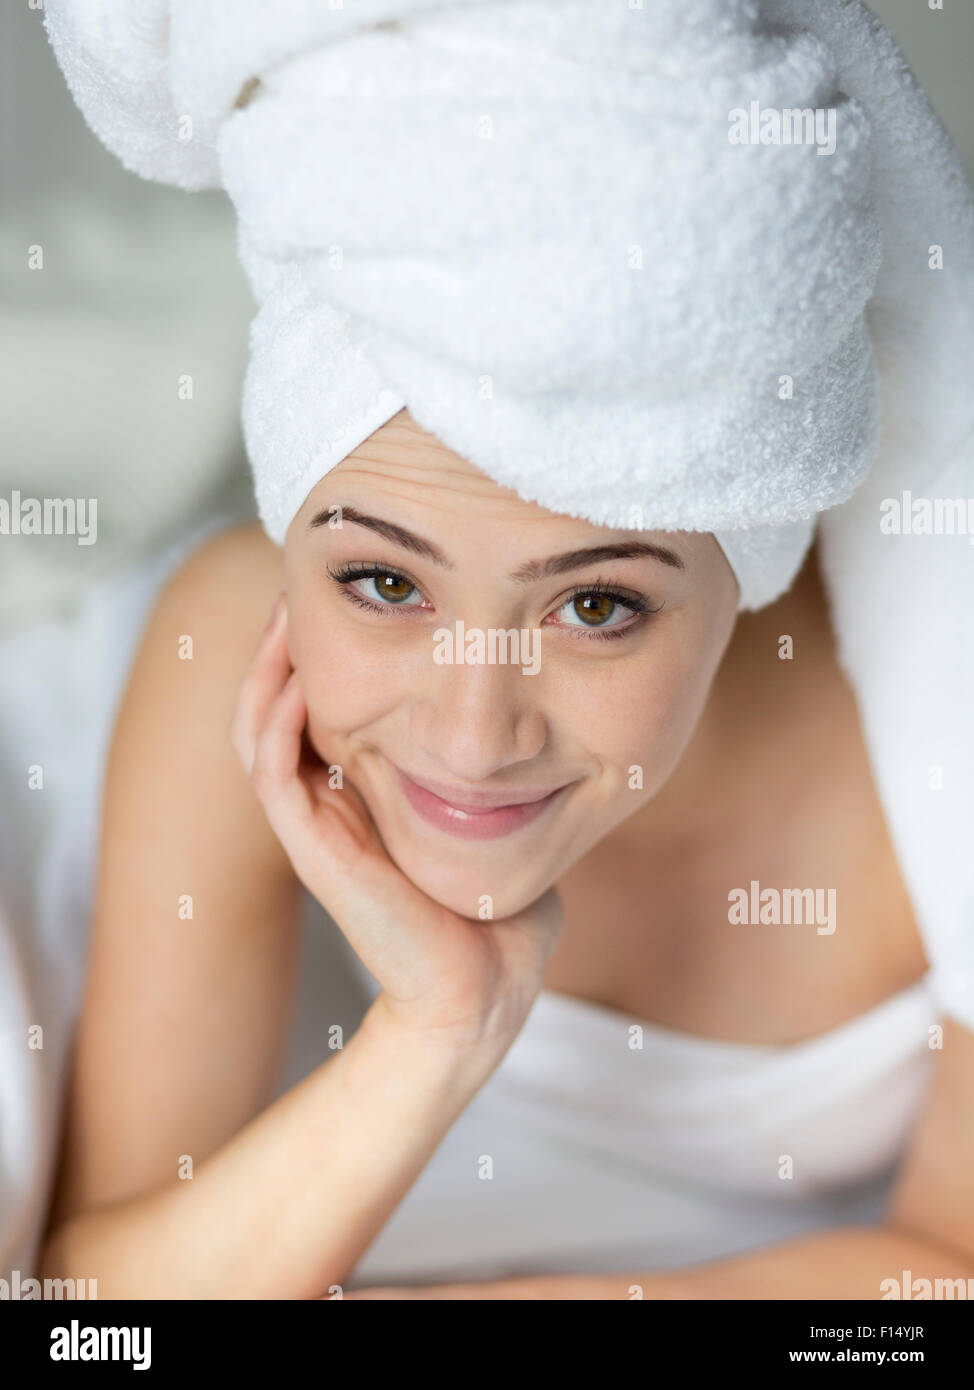 Smiling woman with head wrapped in towel and hand on chin Stock Photo